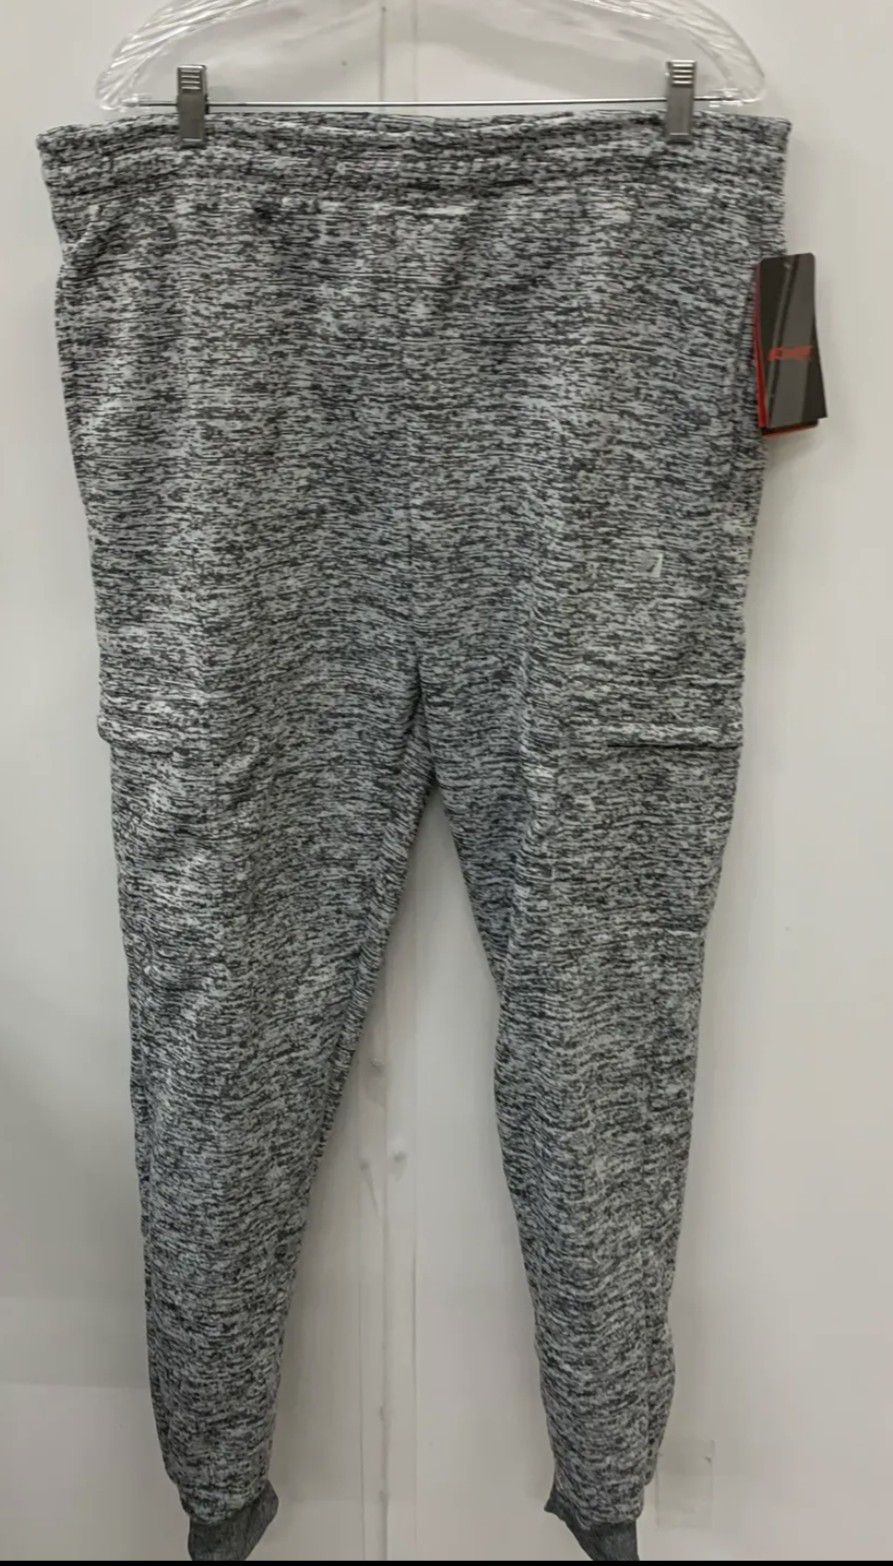 NWT Cougar Sport Men's Gray Joggers Size XXL MSRP $58